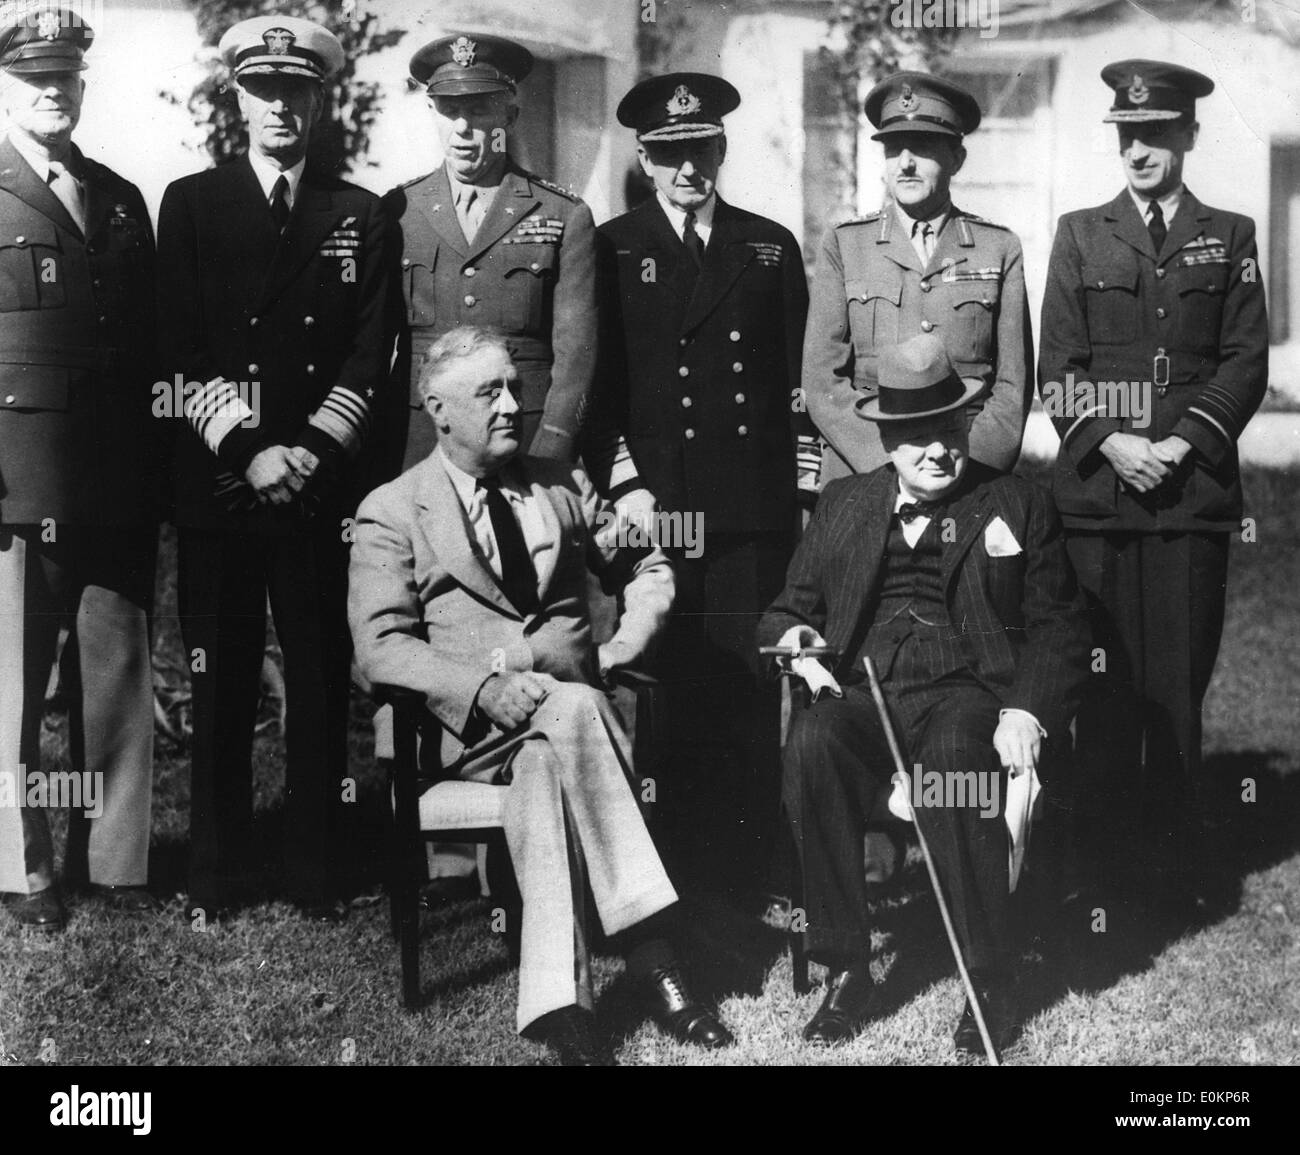 Jan. 01, 1943 - Casablanca, Africa - File photo: circa January 1943. Standing - left to right: GENERAL ARNOLD, ADMIRAL KING, GENERAL MARSHALL, ADMIRAL POUND, Air Chief Marshal PORTAL, GENERAL BROOKE, FIELD MARSHAL DILL, and ADMIRAL MOUNTBATTEN. Front row: President FRANKLIN ROOSEVELT and Prime Minister Sir WINSTON CHURCHILL pose for pictures during their 'historic' conference in Africa. Stock Photo